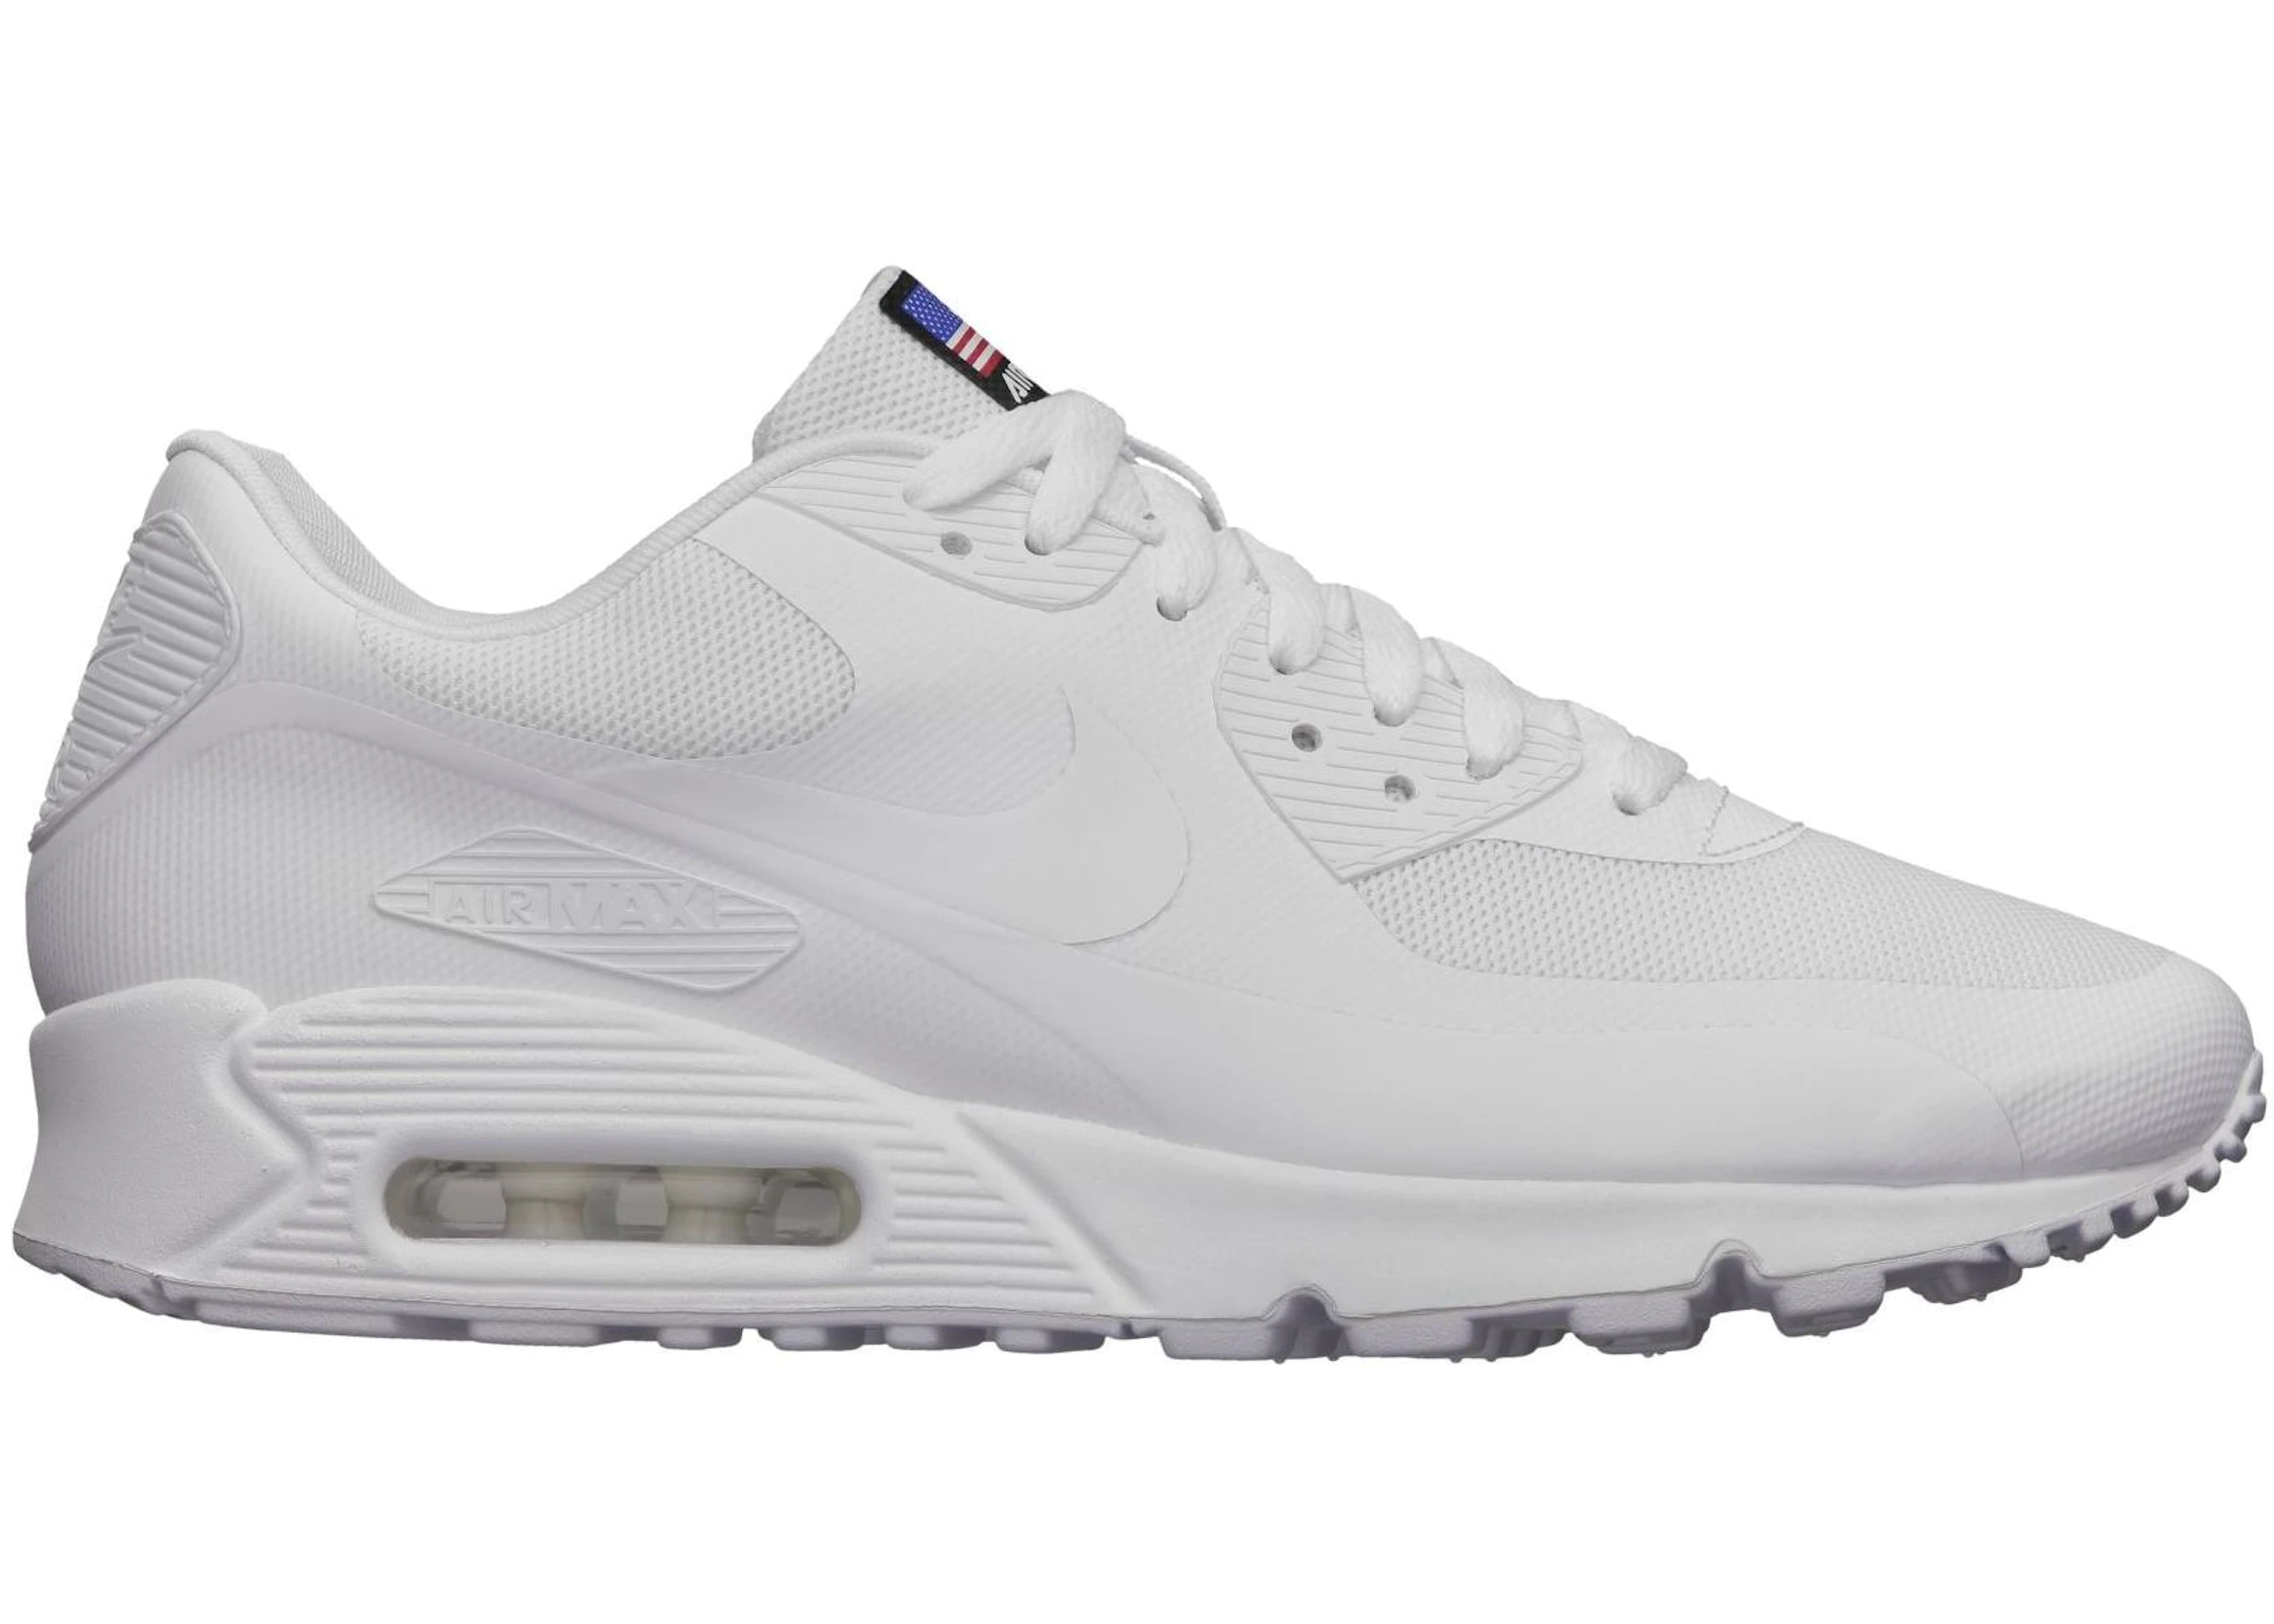 Cardenal Monumento Saltar Nike Air Max 90 Hyperfuse Independence Day White - 613841-110 - ES